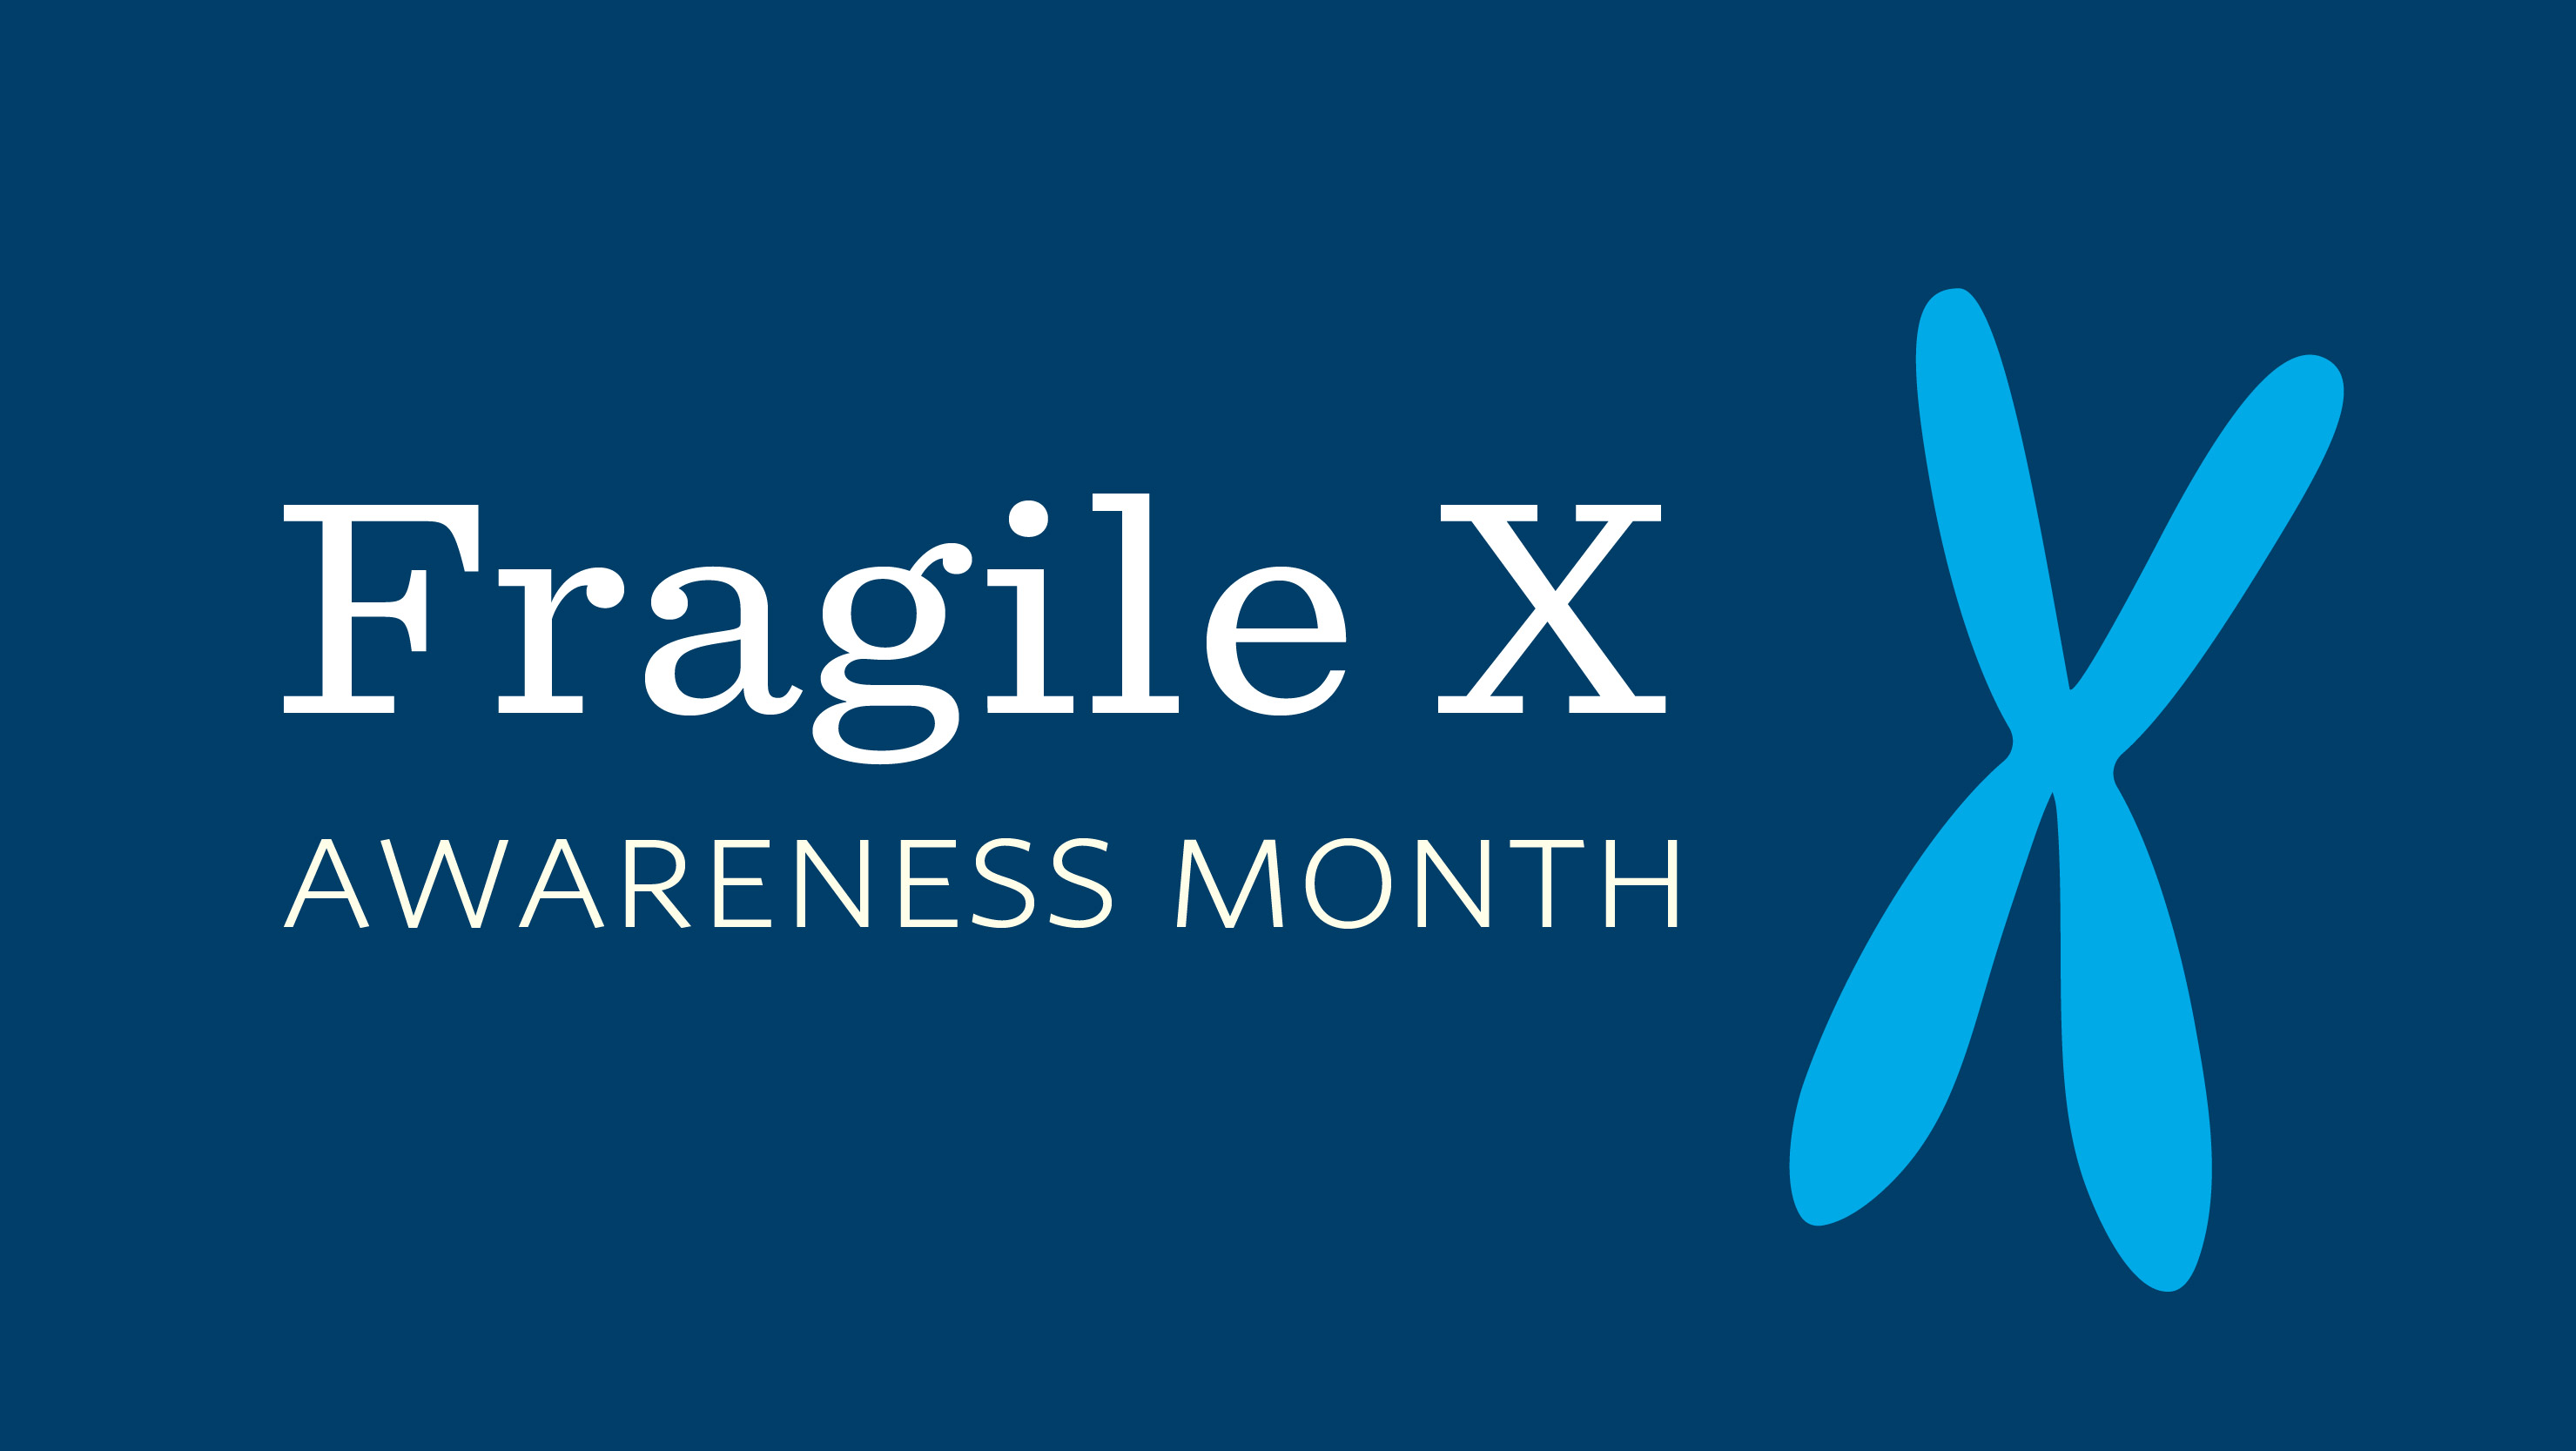 5 Benefits I Learned From Fragile X Patients And Their Families View Blog Post Ambry Blog